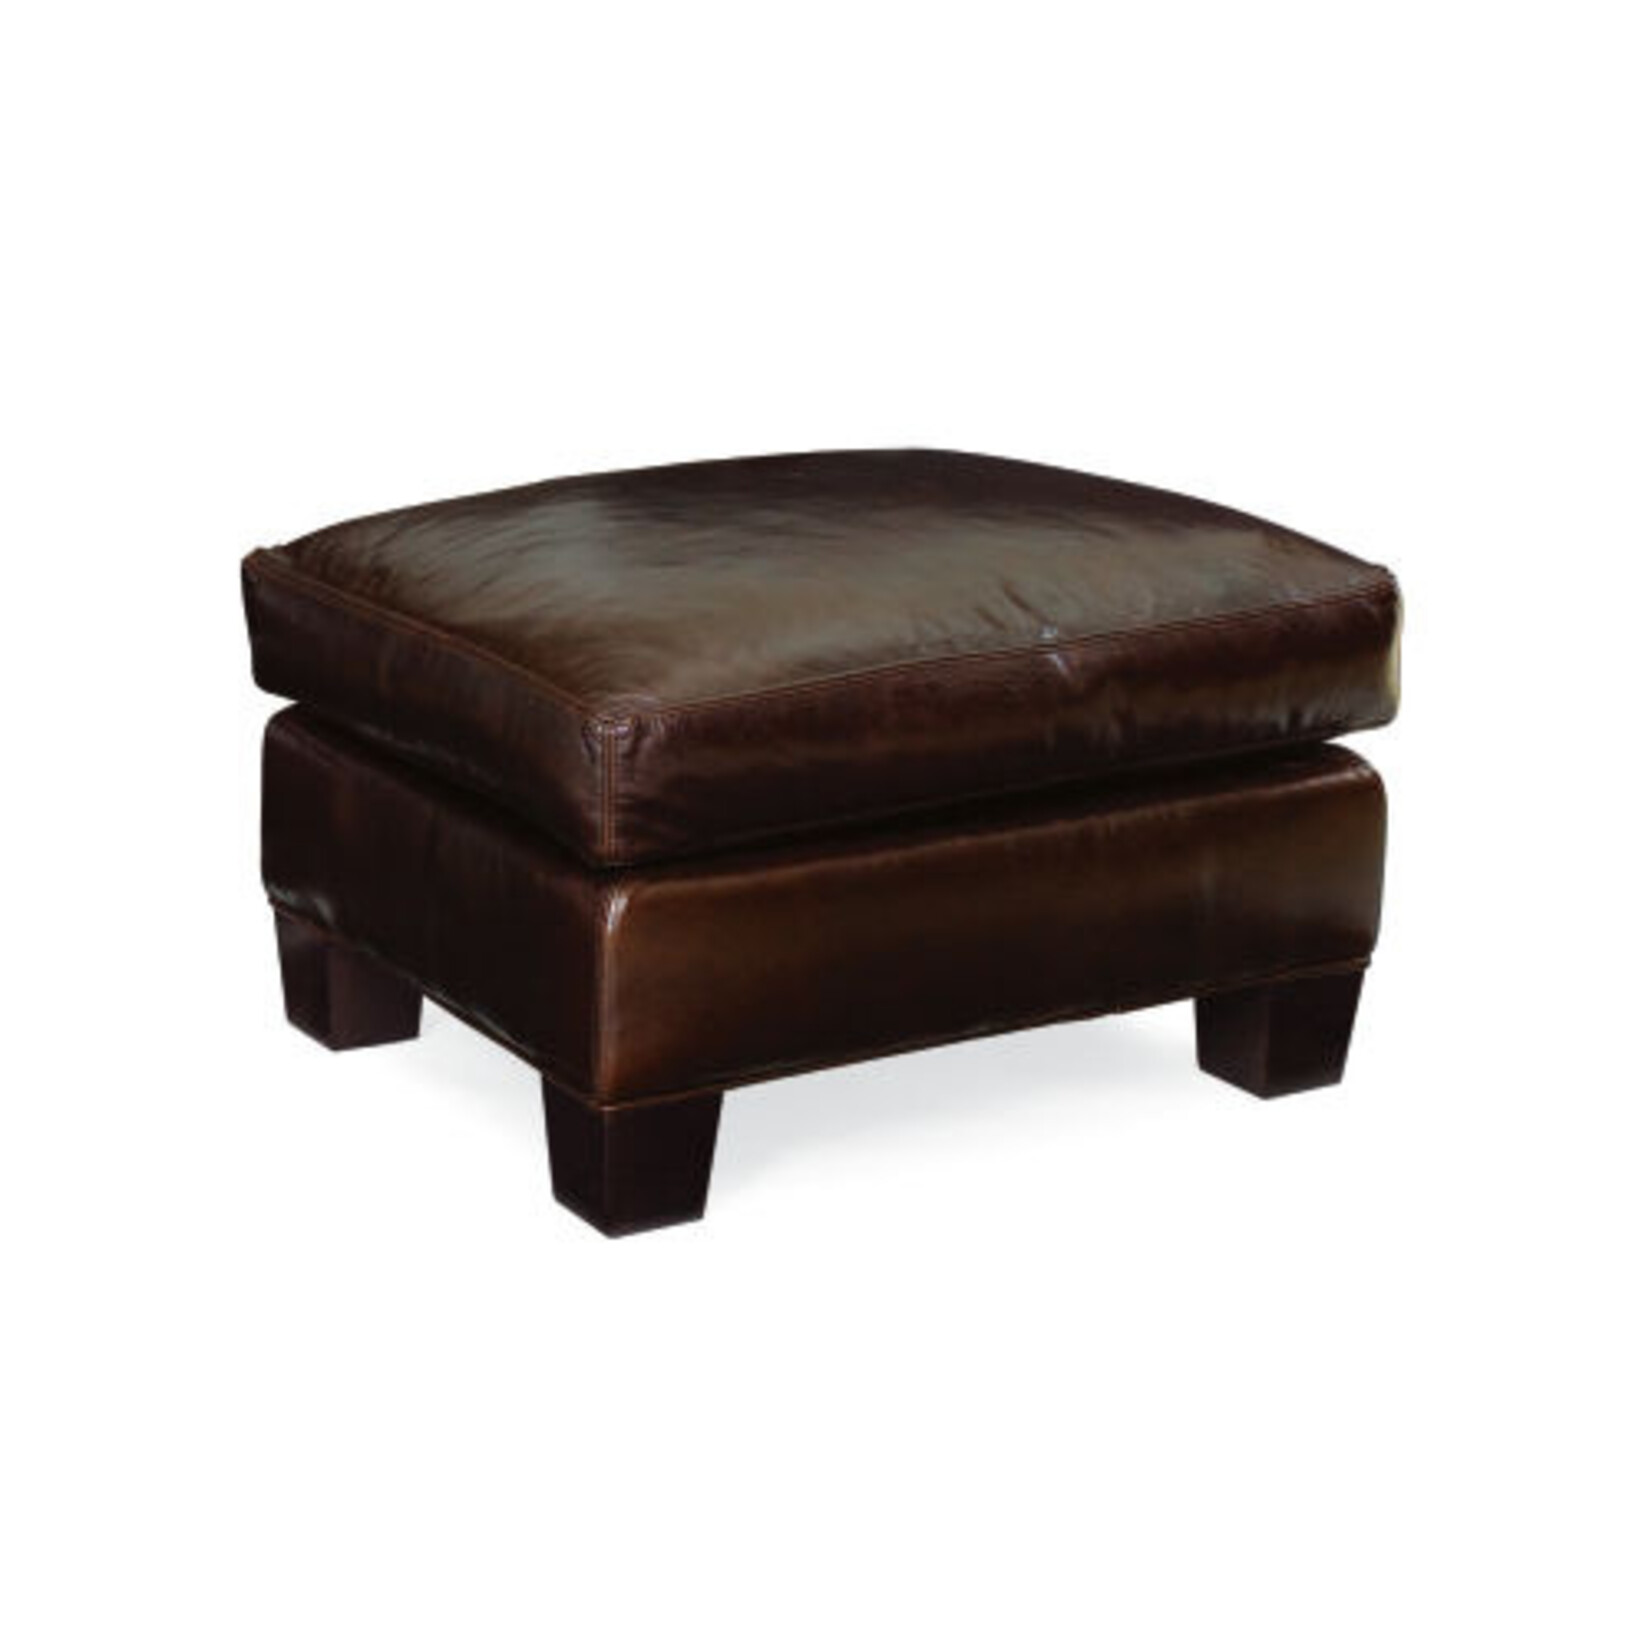 1822 Leather Ottoman - Chaps Toffee